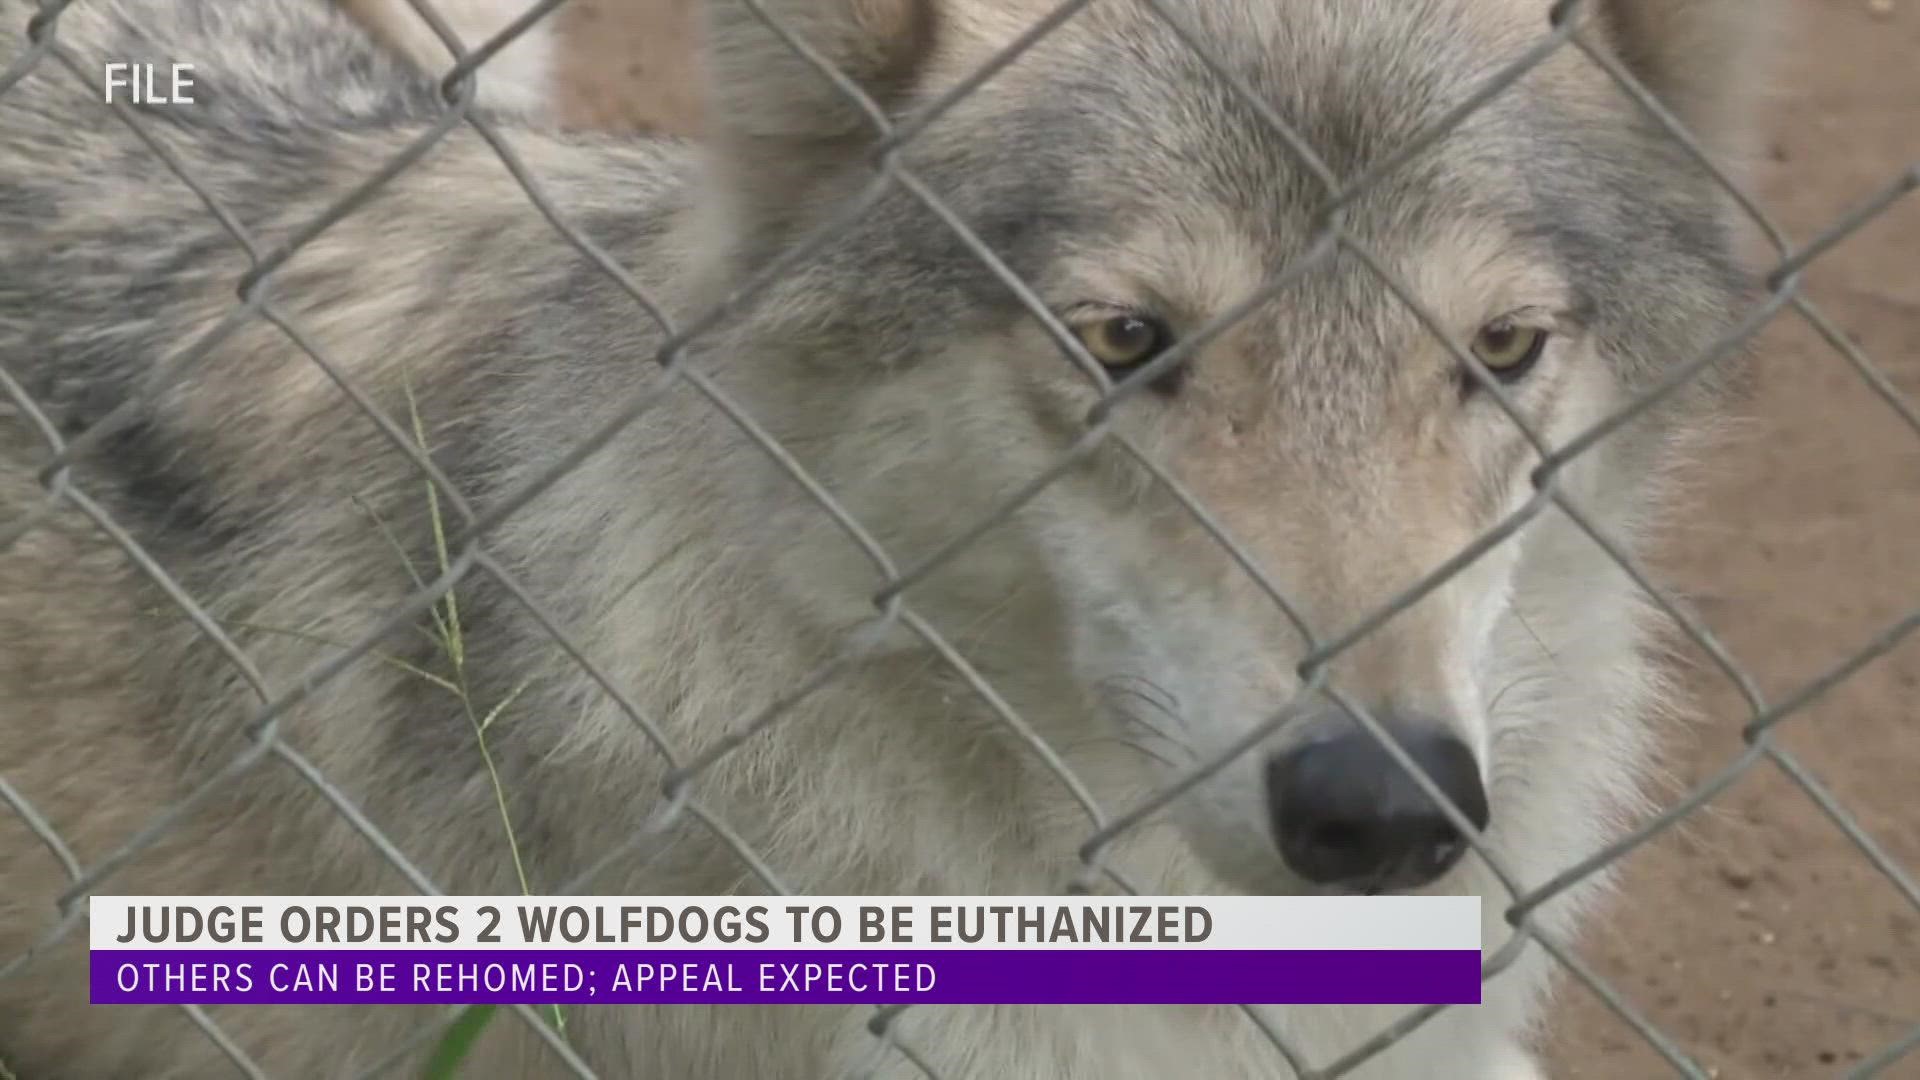 Two wolf dogs who have bitten people will be euthanized, according to the judge's ruling. Any dogs that cannot be relocated will also be euthanized.